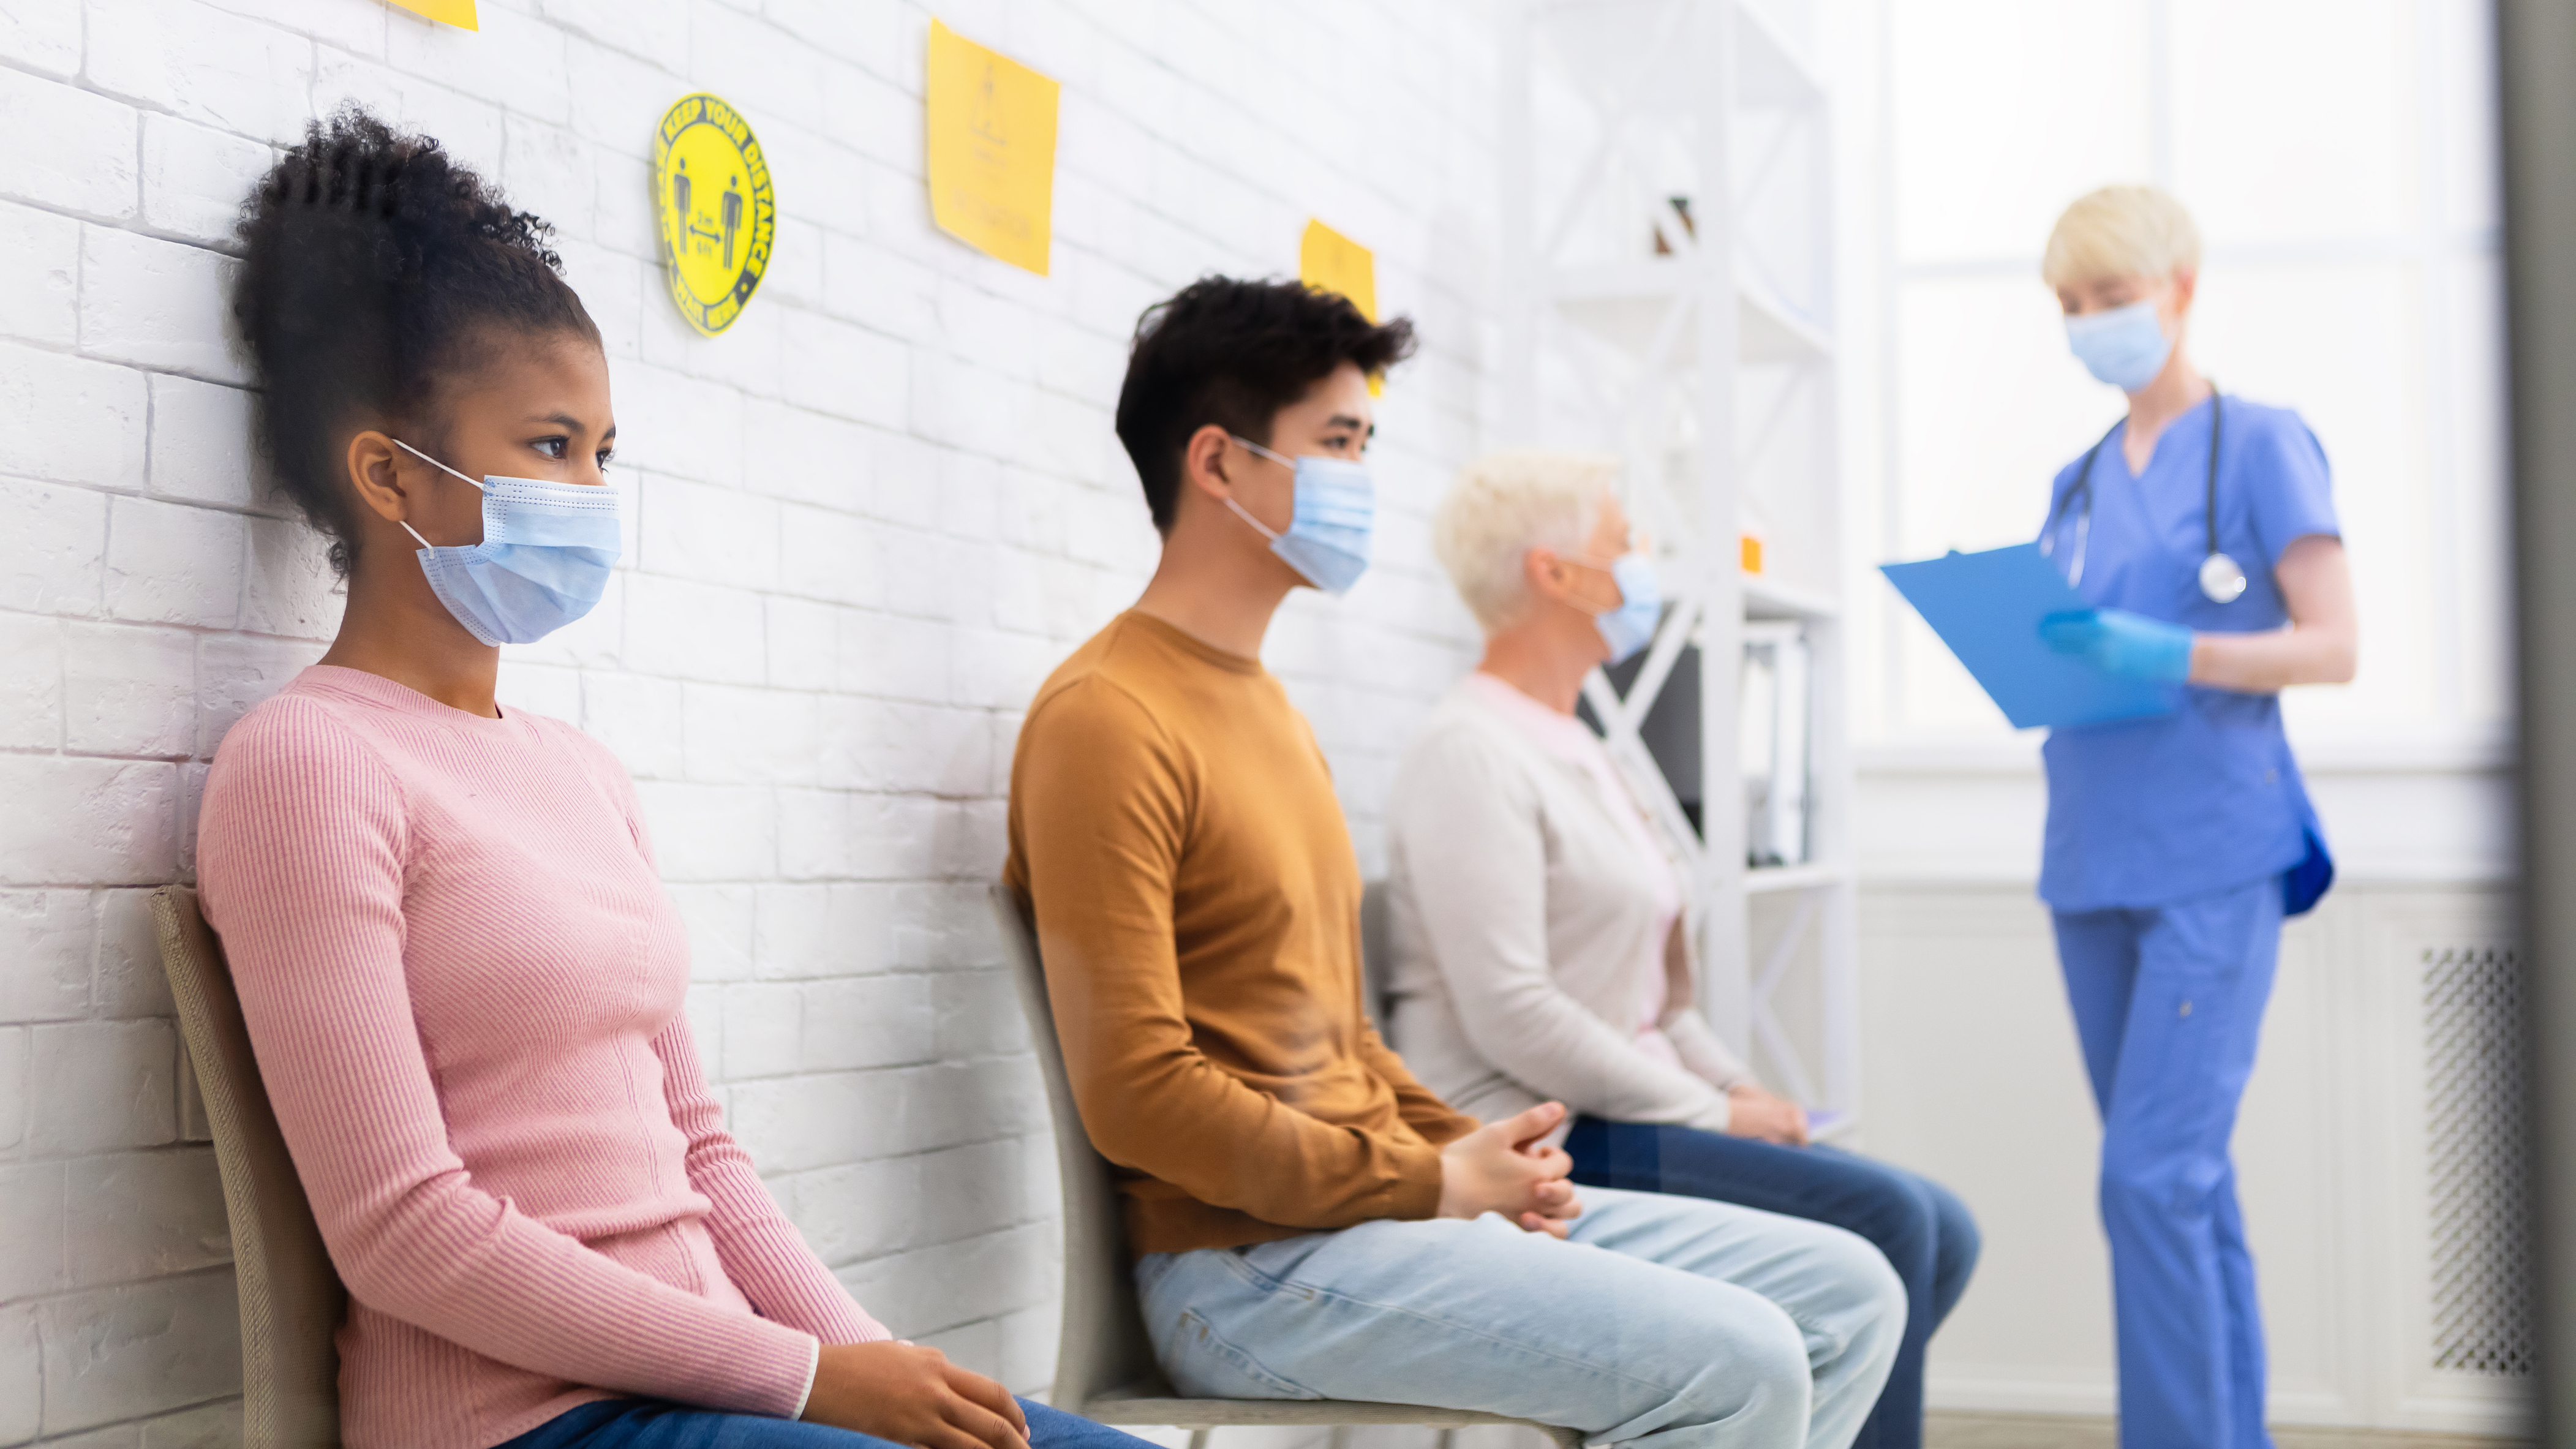 Seated patients wearing masks in the waiting area of a clinic